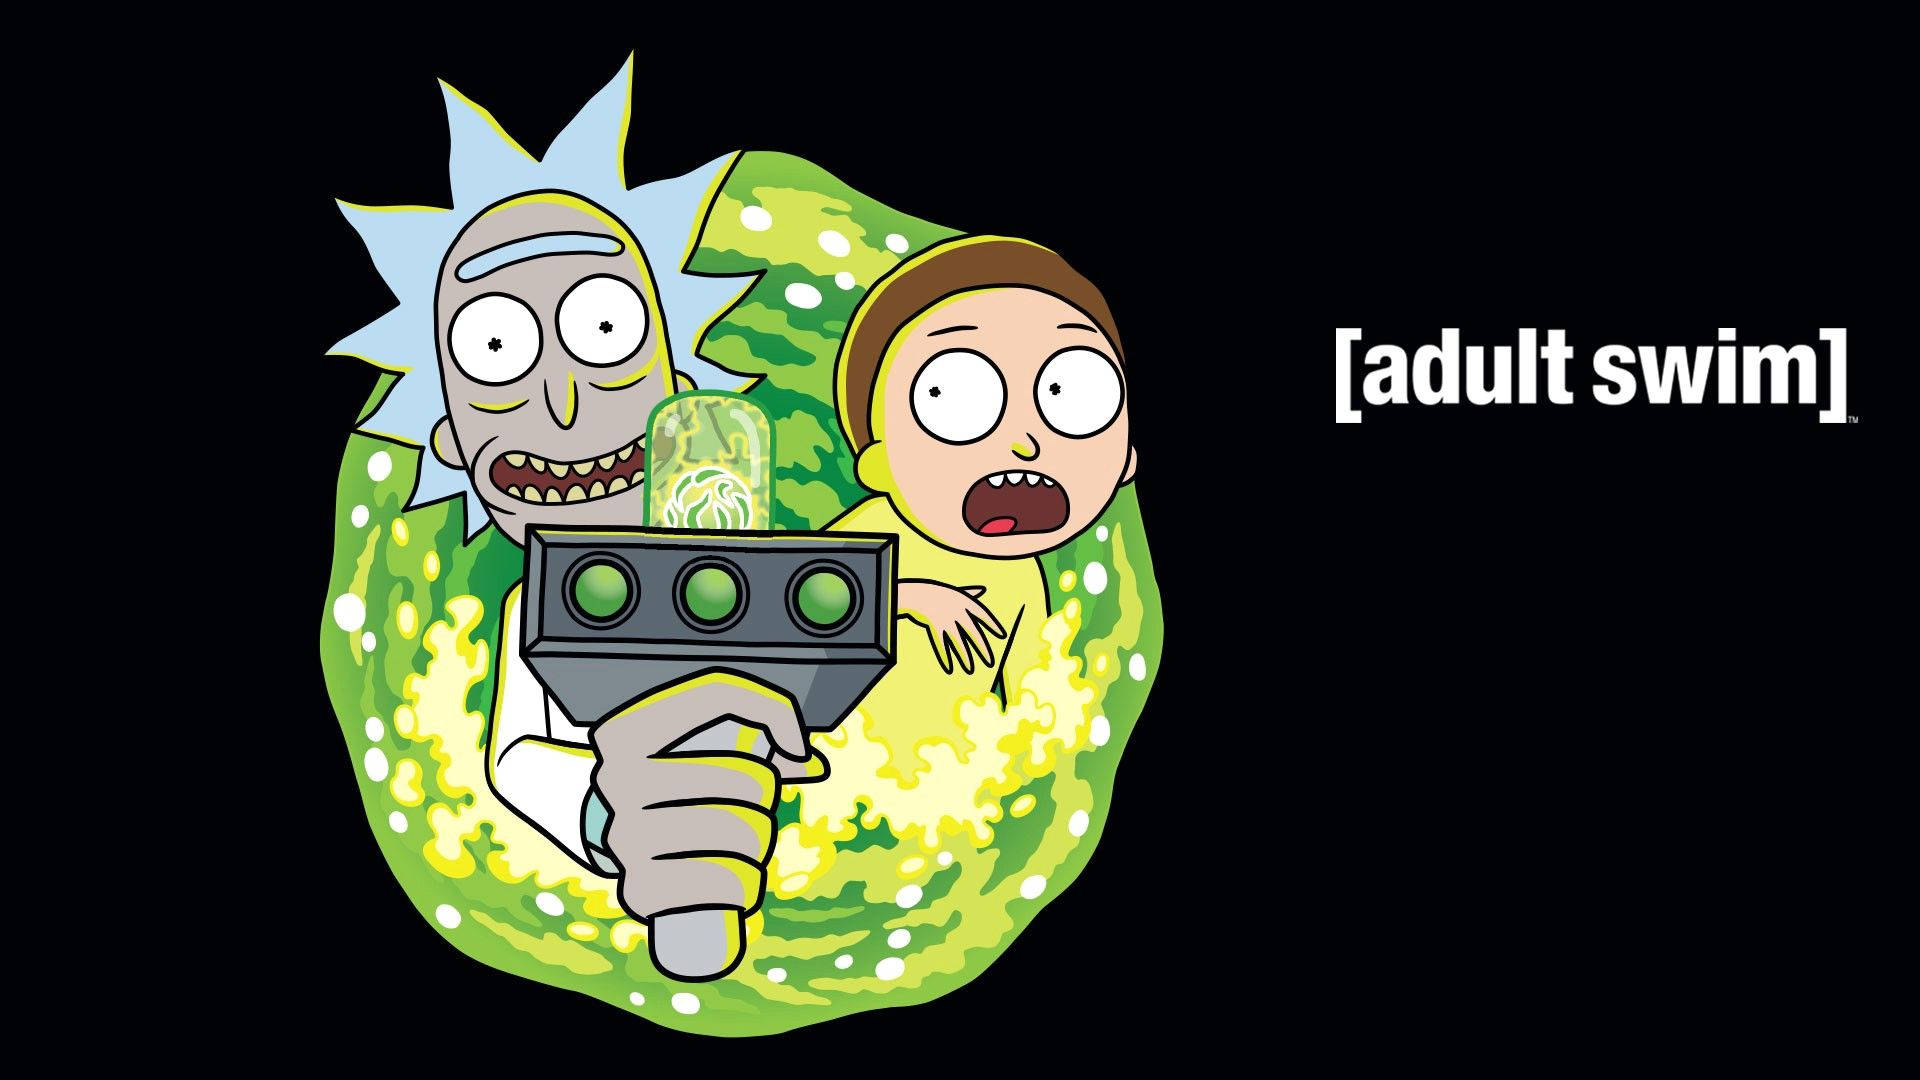 "Rick and Morty - the show based on interdimensional shenanigans - take time out to relax with some weed!" Wallpaper